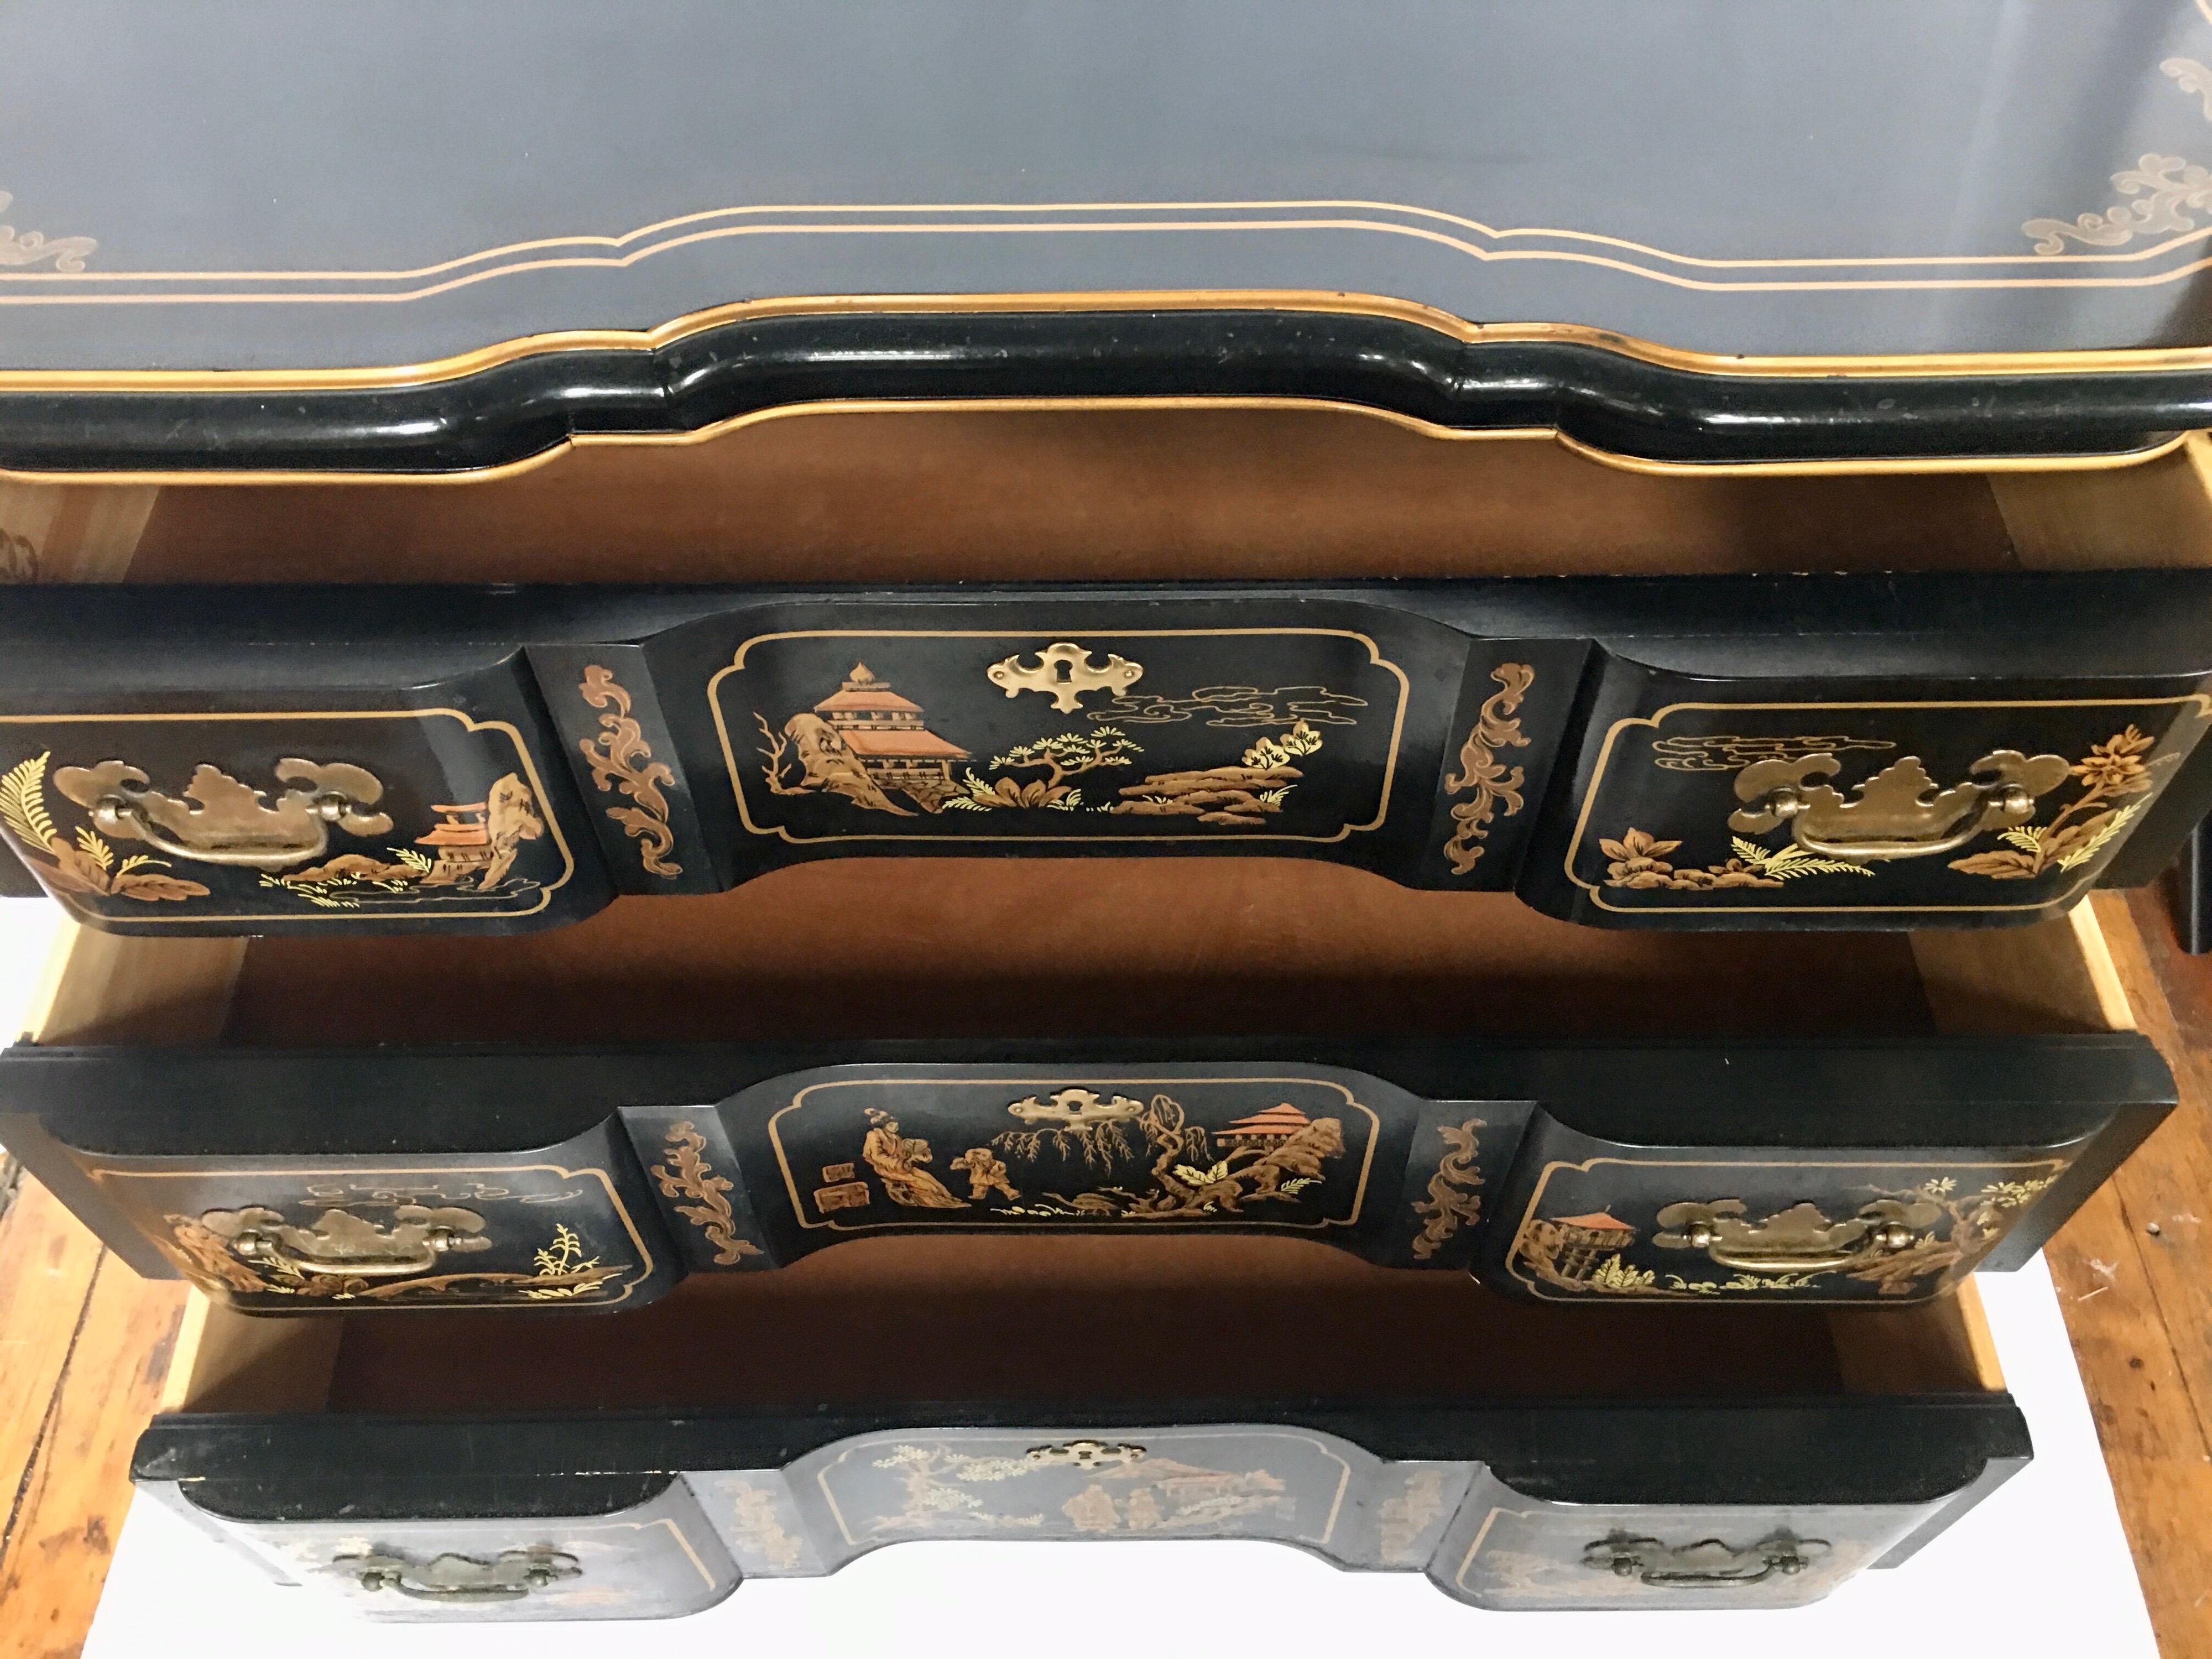 Chinoiserie Asian Style Serpentine Chest Dresser and Wall Mirror Set by Drexel 3